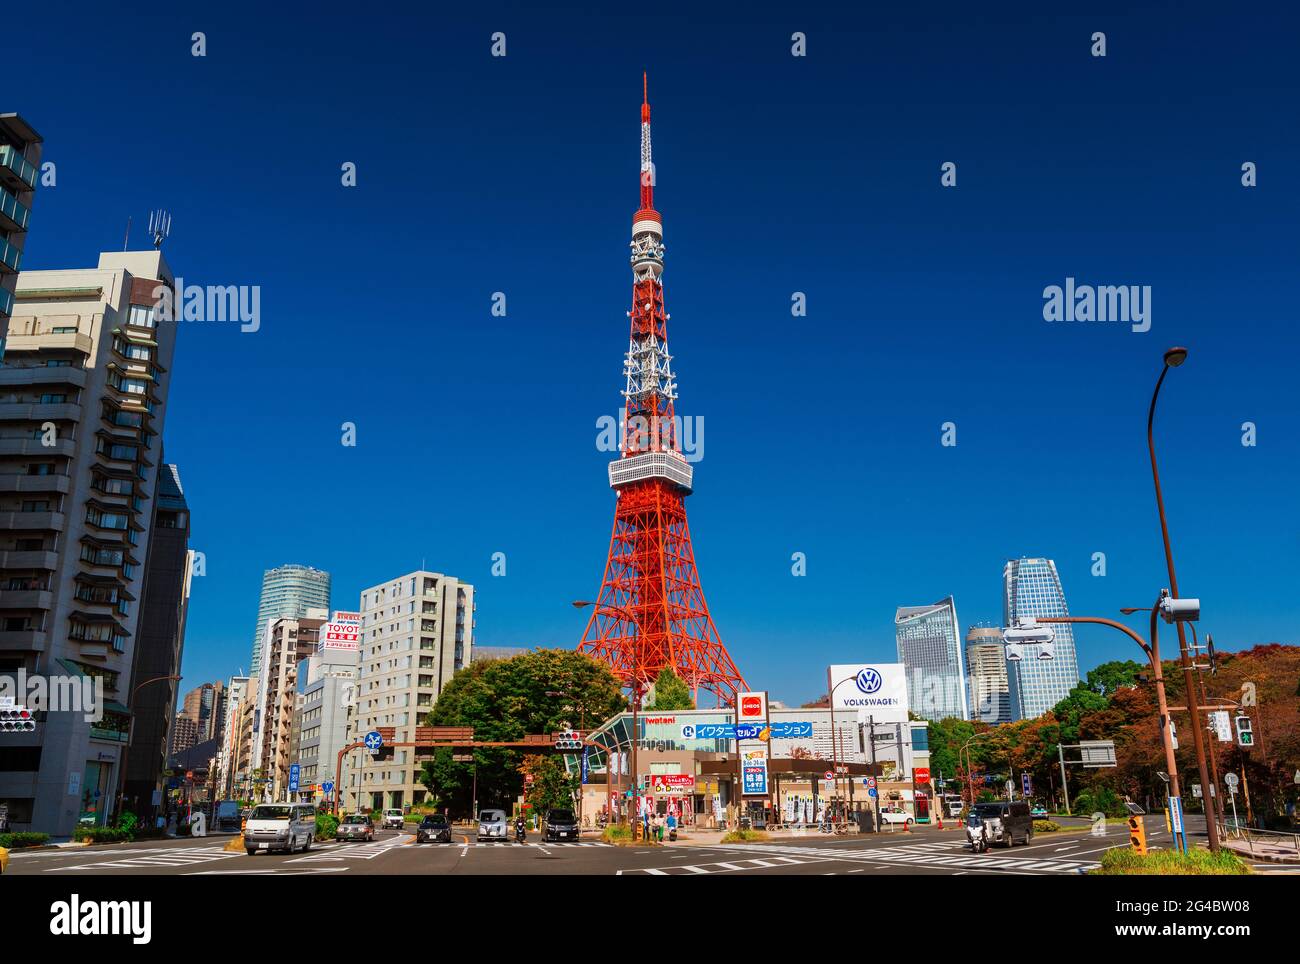 The iconic Tokyo Tower against blue sky seen from Shiba and Akenebashi areas Stock Photo